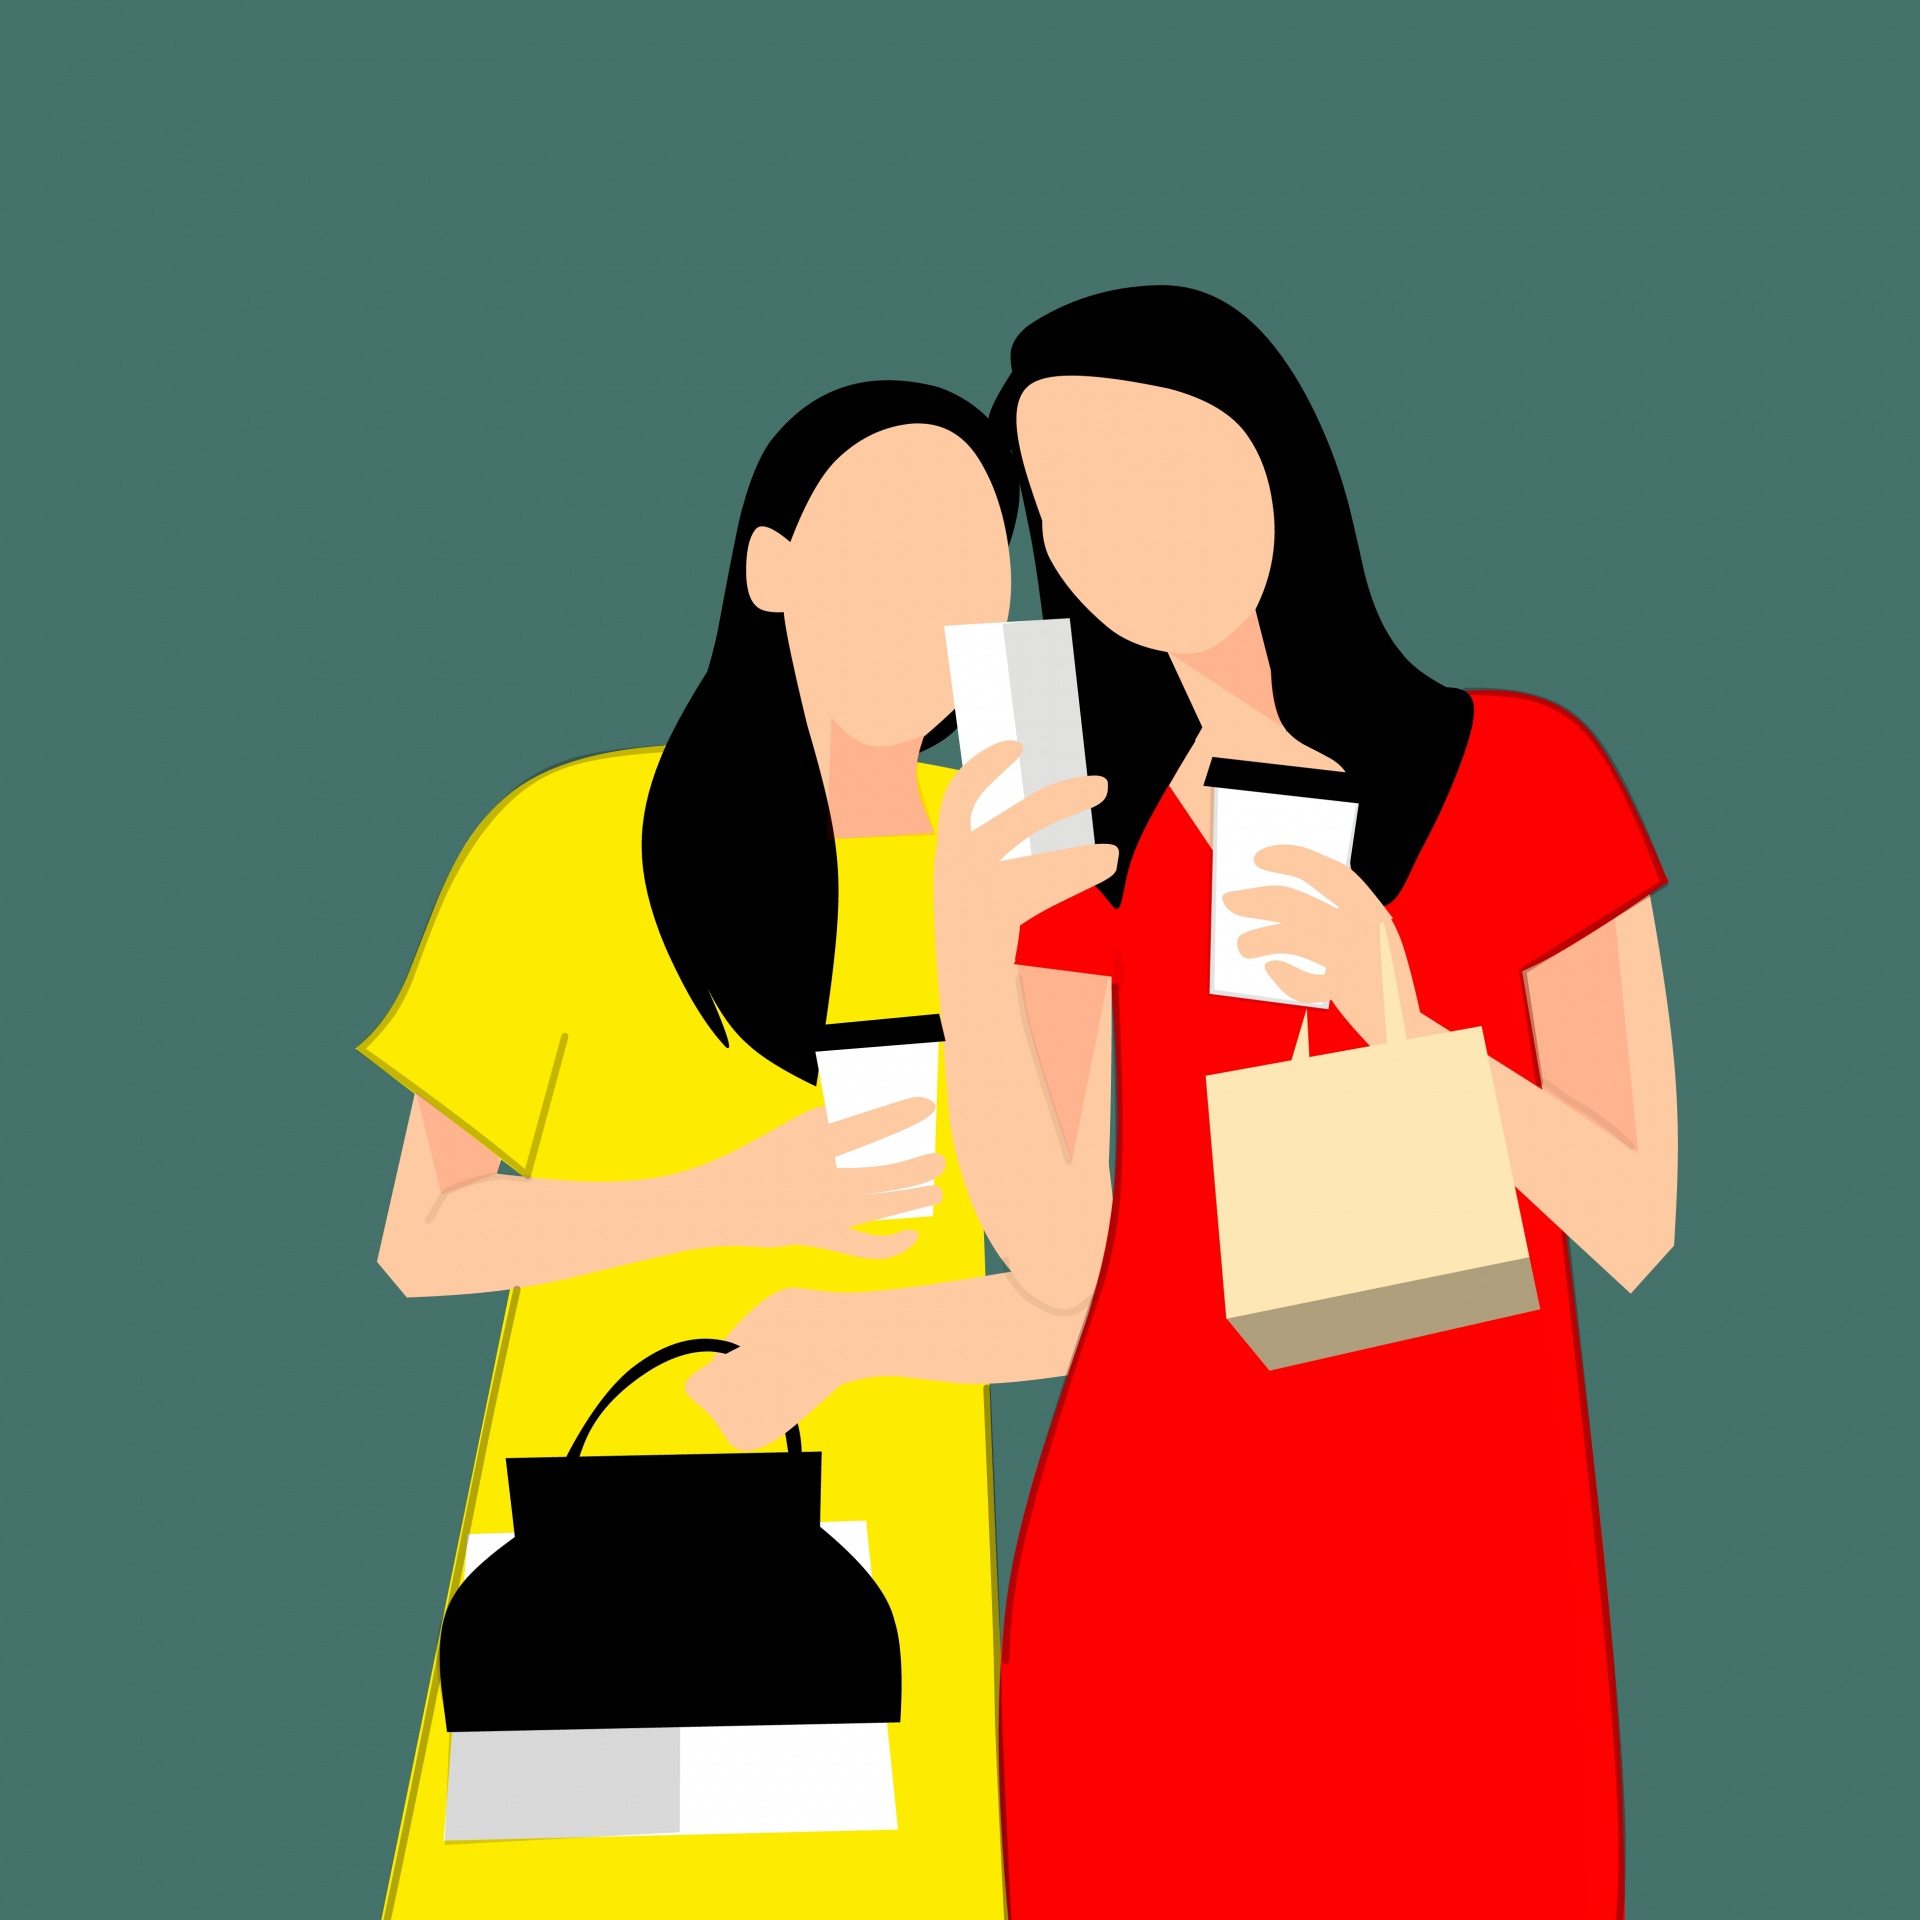 Women Friends Connecting Illustrations Clips , HD Wallpaper & Backgrounds